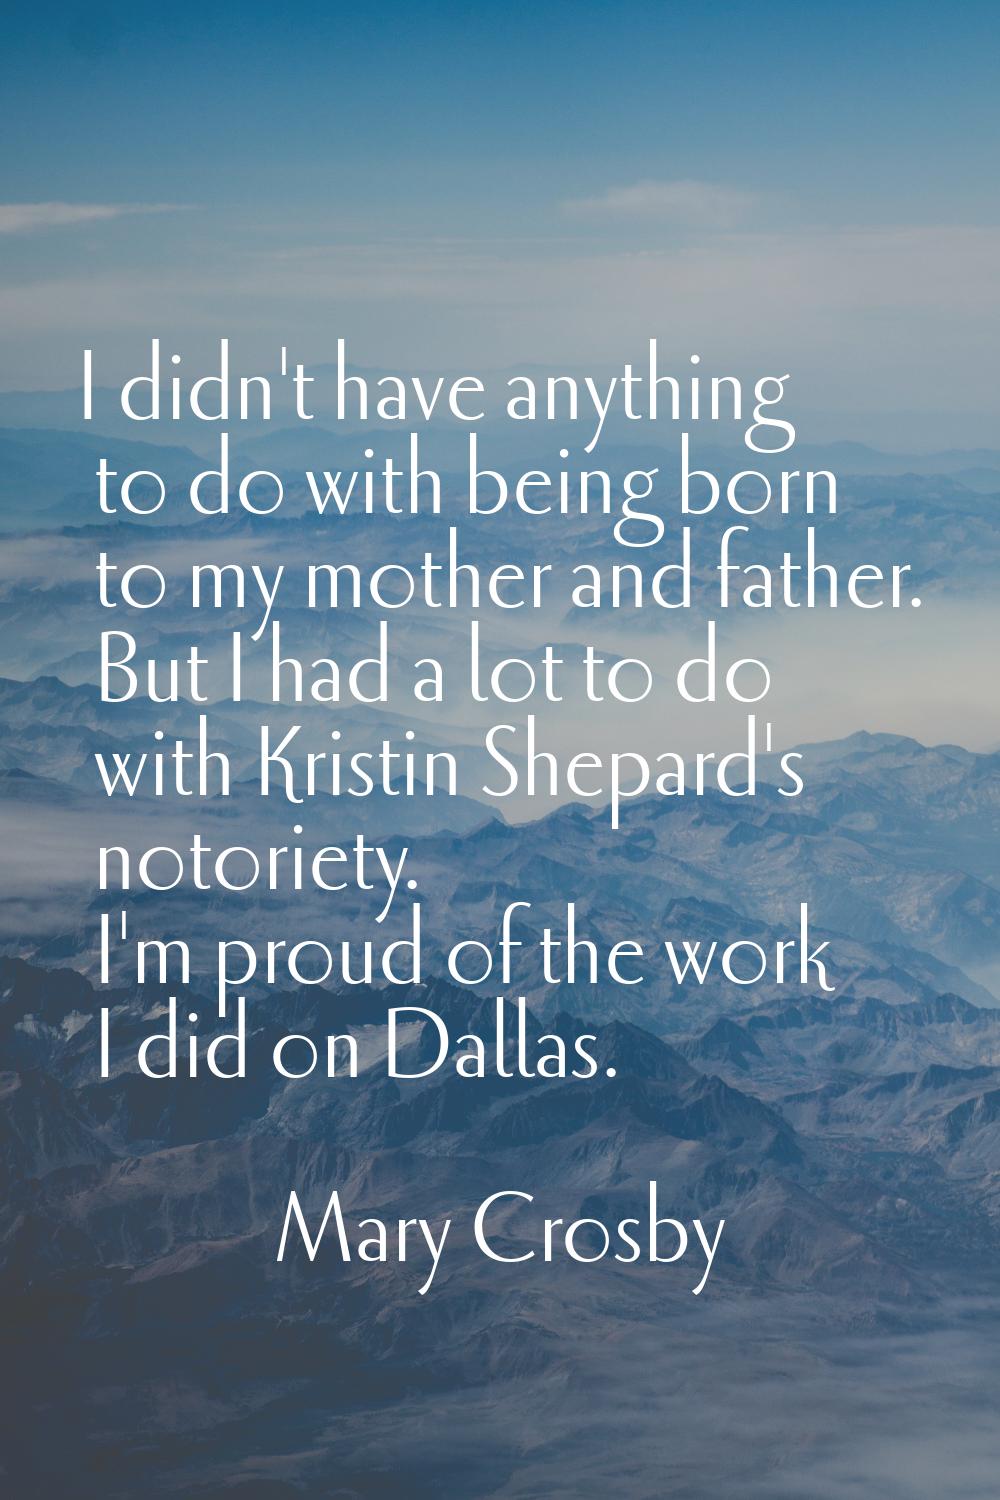 I didn't have anything to do with being born to my mother and father. But I had a lot to do with Kr